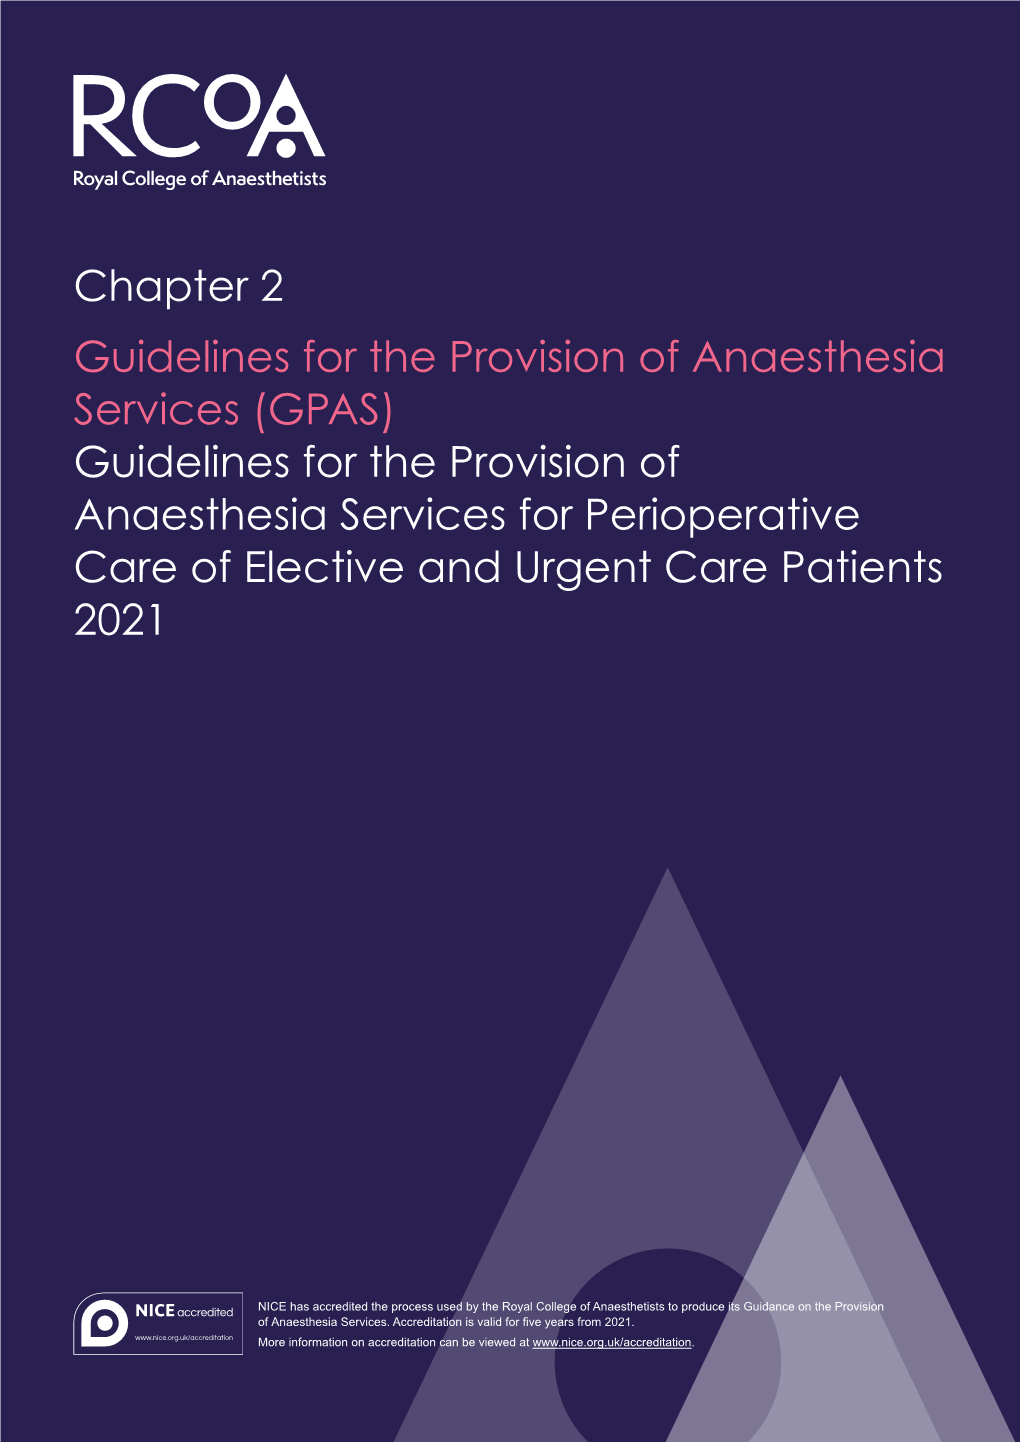 Guidelines for the Provision of Anaesthesia Services for Perioperative Care of Elective and Urgent Care Patients 2021